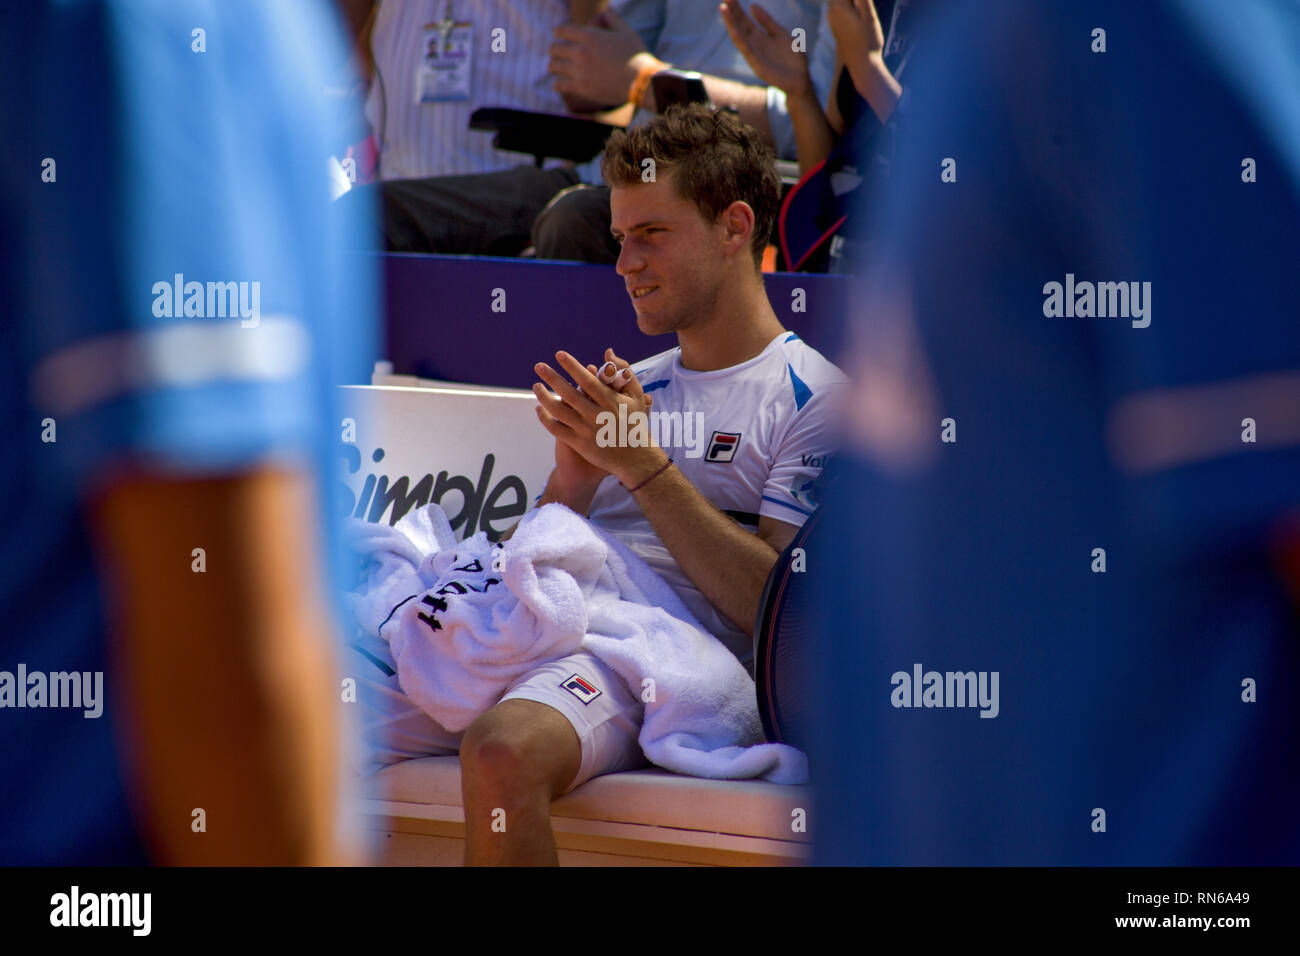 Buenos Aires, Federal Capital, Argentina. 17th Feb, 2019. Marco Cecchinato is the Champion of the ATP 250 of the Argentina Open 2019 after winning in two straight sets 6-1; 6-2 to the Argentinian Diego Swartzman. Credit: Roberto Almeida Aveledo/ZUMA Wire/Alamy Live News Stock Photo